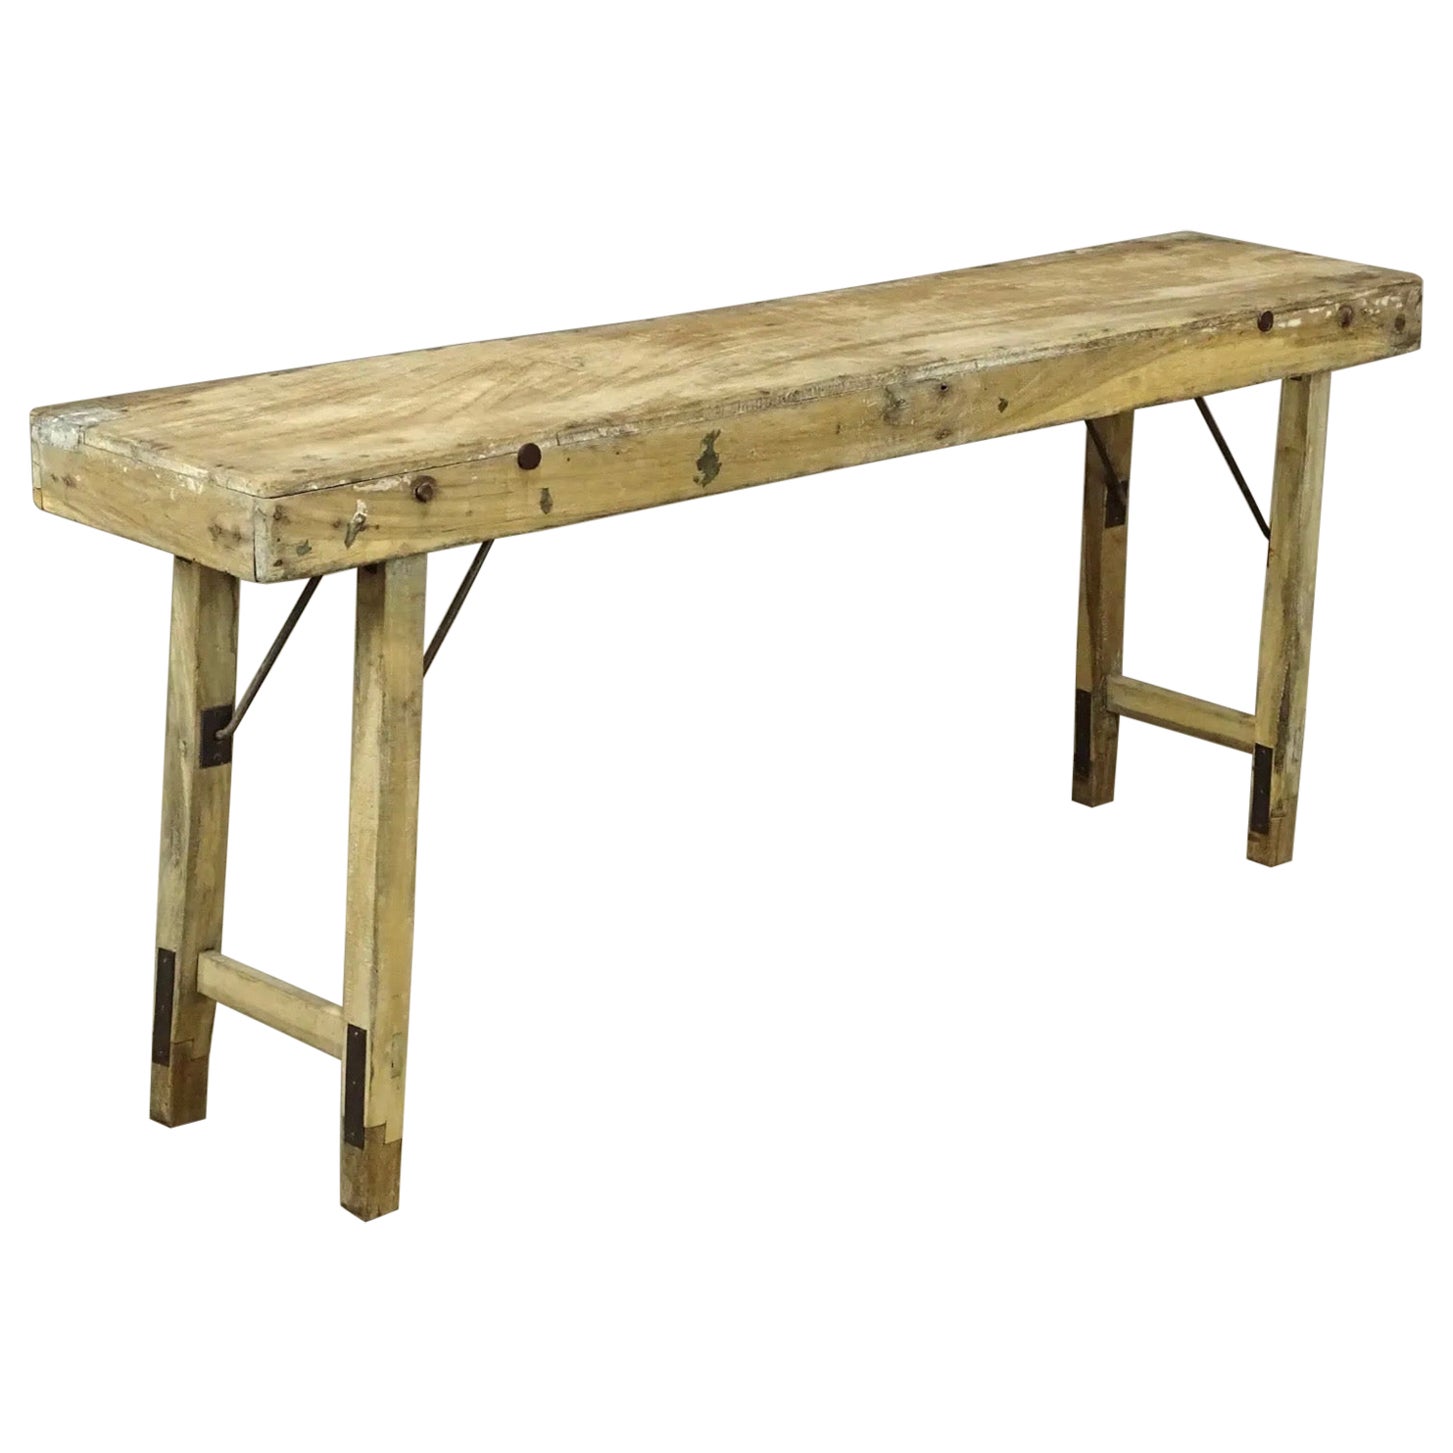 Early Rustic Folding Table Possibly Use for Paper Hanging